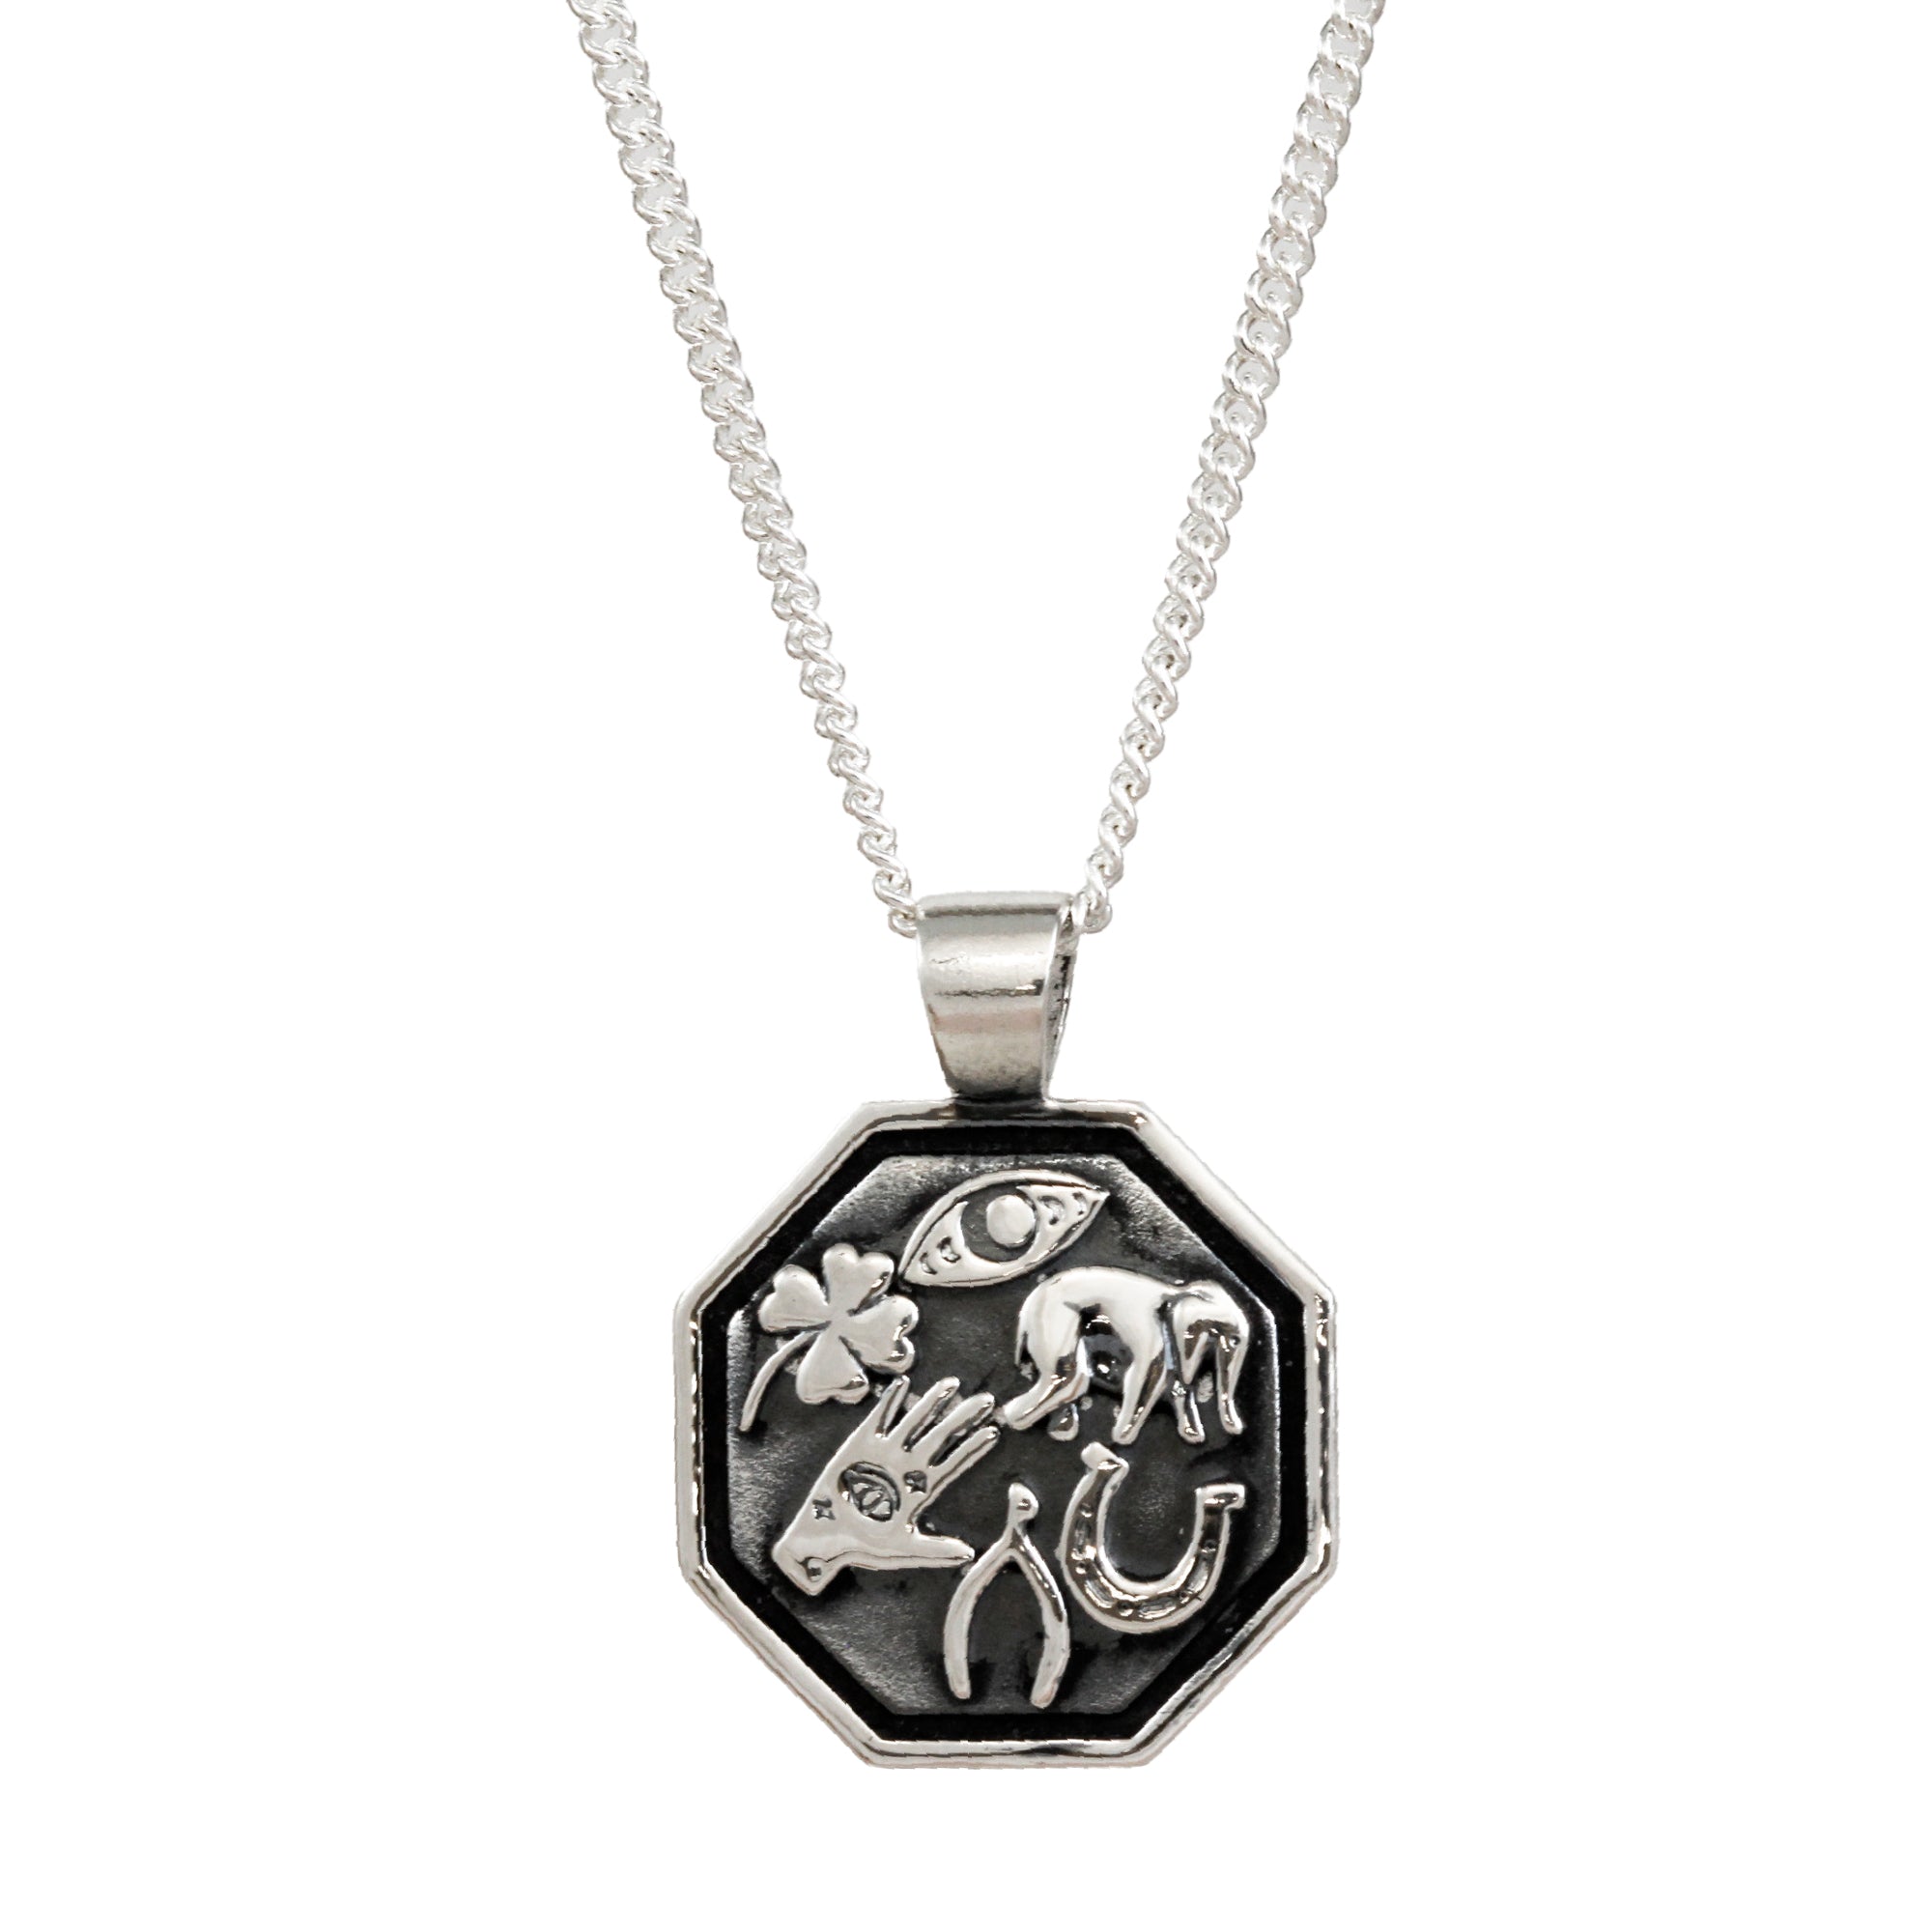 Personalized Win Name Silver Necklace For Men With Custom Iced Out Letters  And Brush Pendant CX200725288q From Jrcwi, $34.26 | DHgate.Com